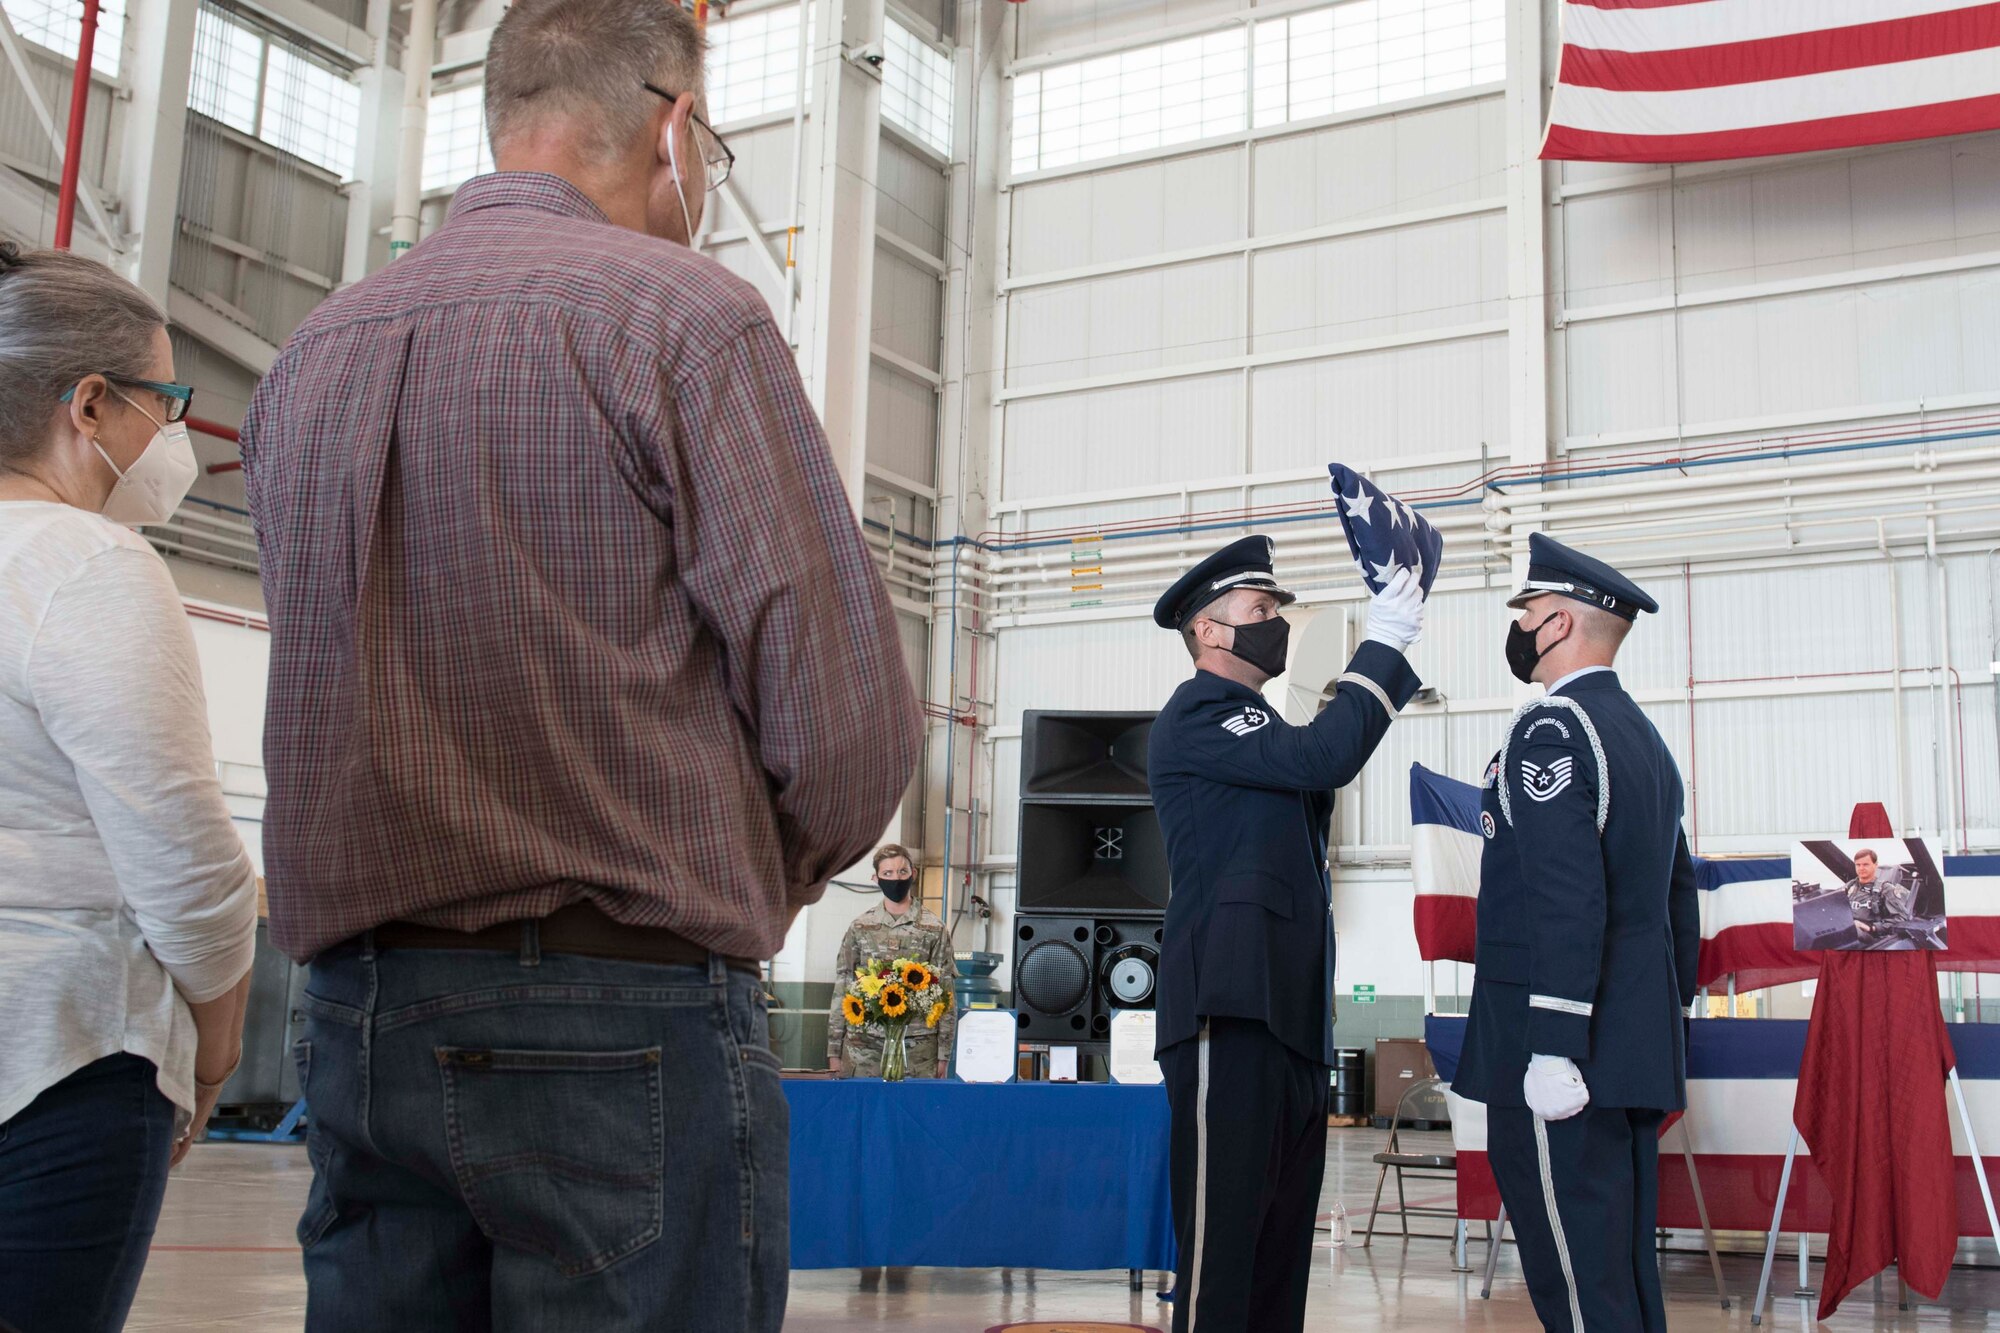 167th Airlift Wing Honor Guard members, Staff Sgt. Tim Sencindiver and Tech. Sgt. Jonathan Engler, conclude a flag folding during a memorial service for Lt. Col. Barry Rowekamp held in an aircraft hangar, Shepherd Field, Martinsburg, West Virginia, Aug. 19, 2021. (U.S. Air National Guard photo by Senior Master Sgt. Emily Beightol-Deyerle)